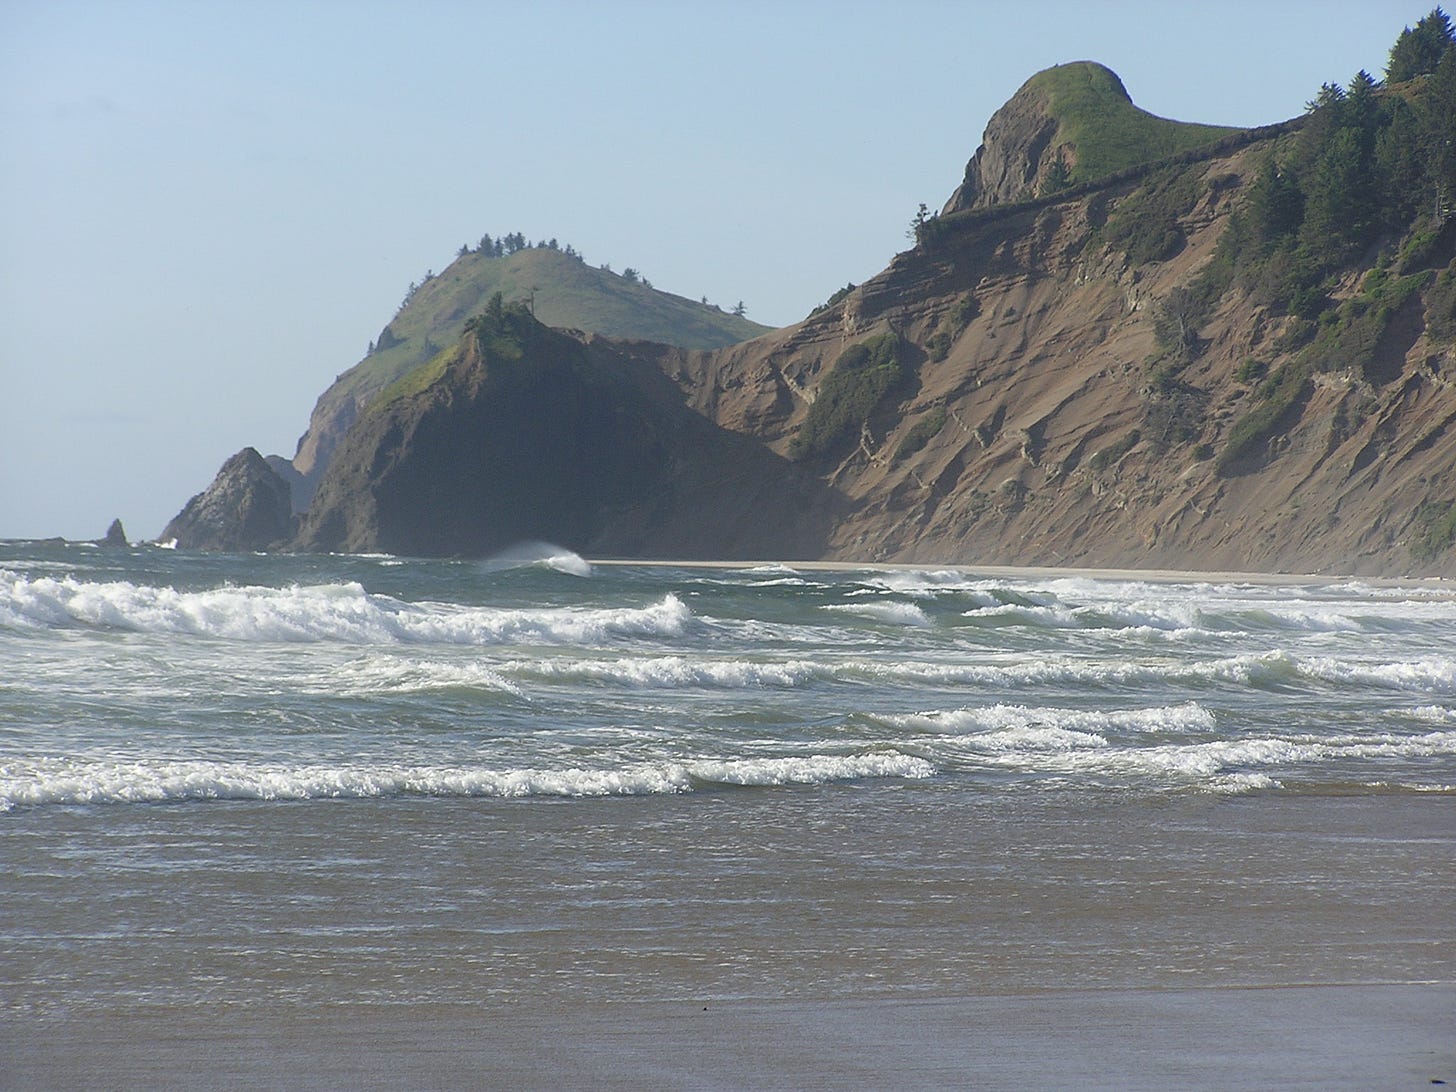 File:Beach at Road's End State Park (Lincoln City, Oregon - June 2007).jpg